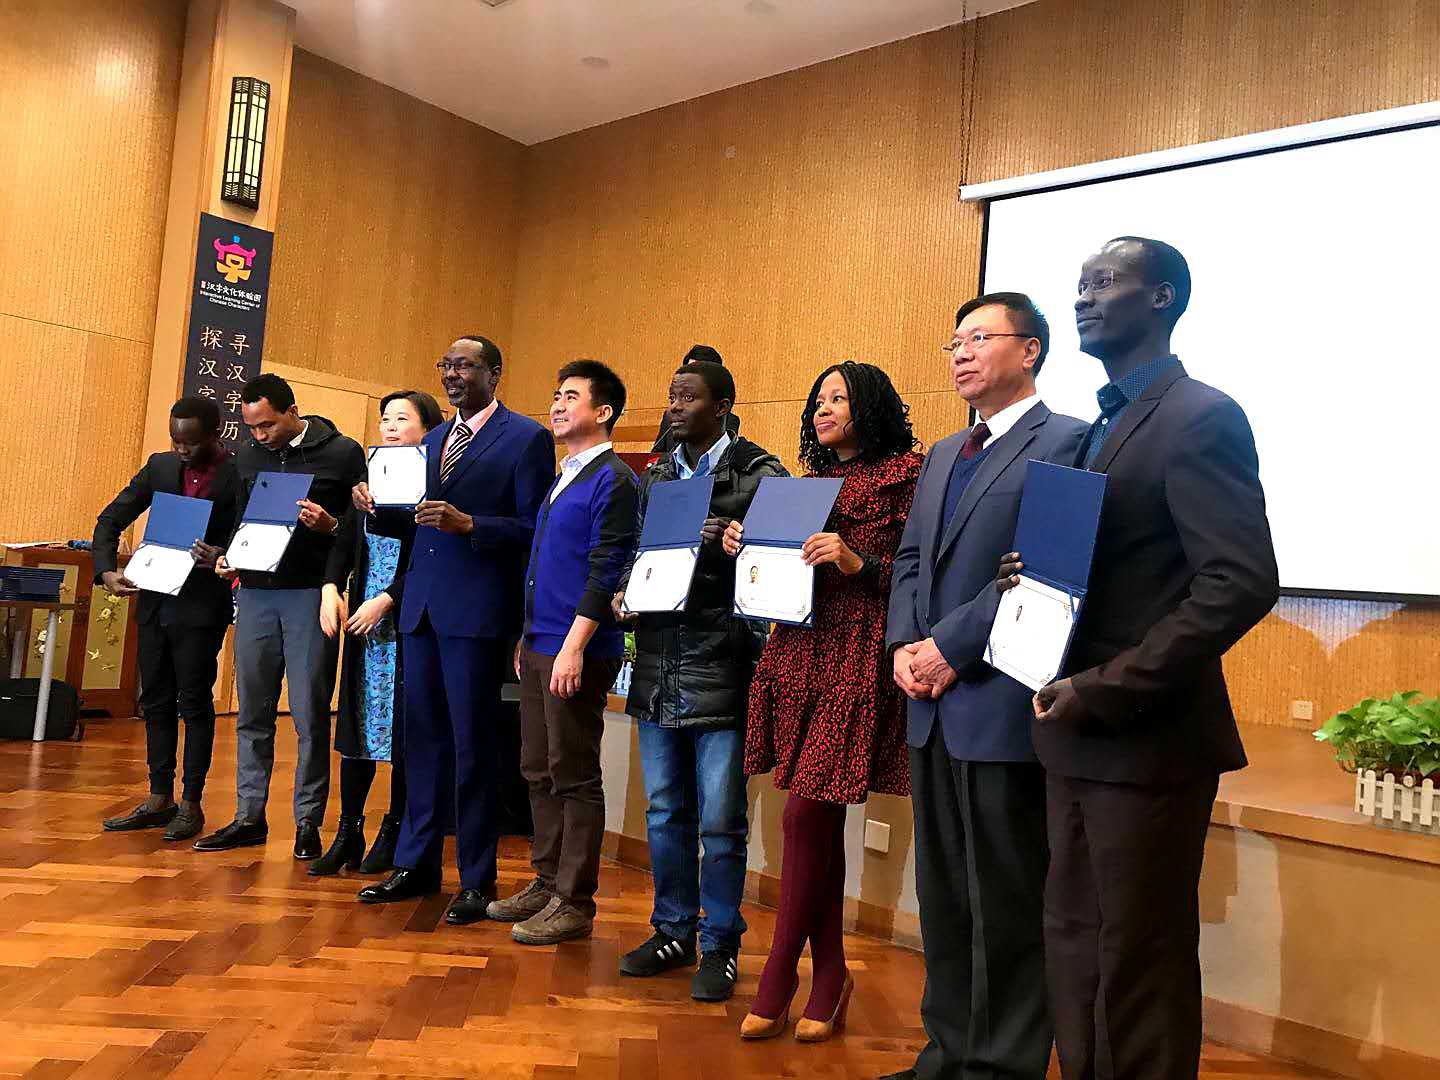 Photos of our graduation Ceremony at Beijing International Chinese College BICC in Beijing. 10th December 2019.